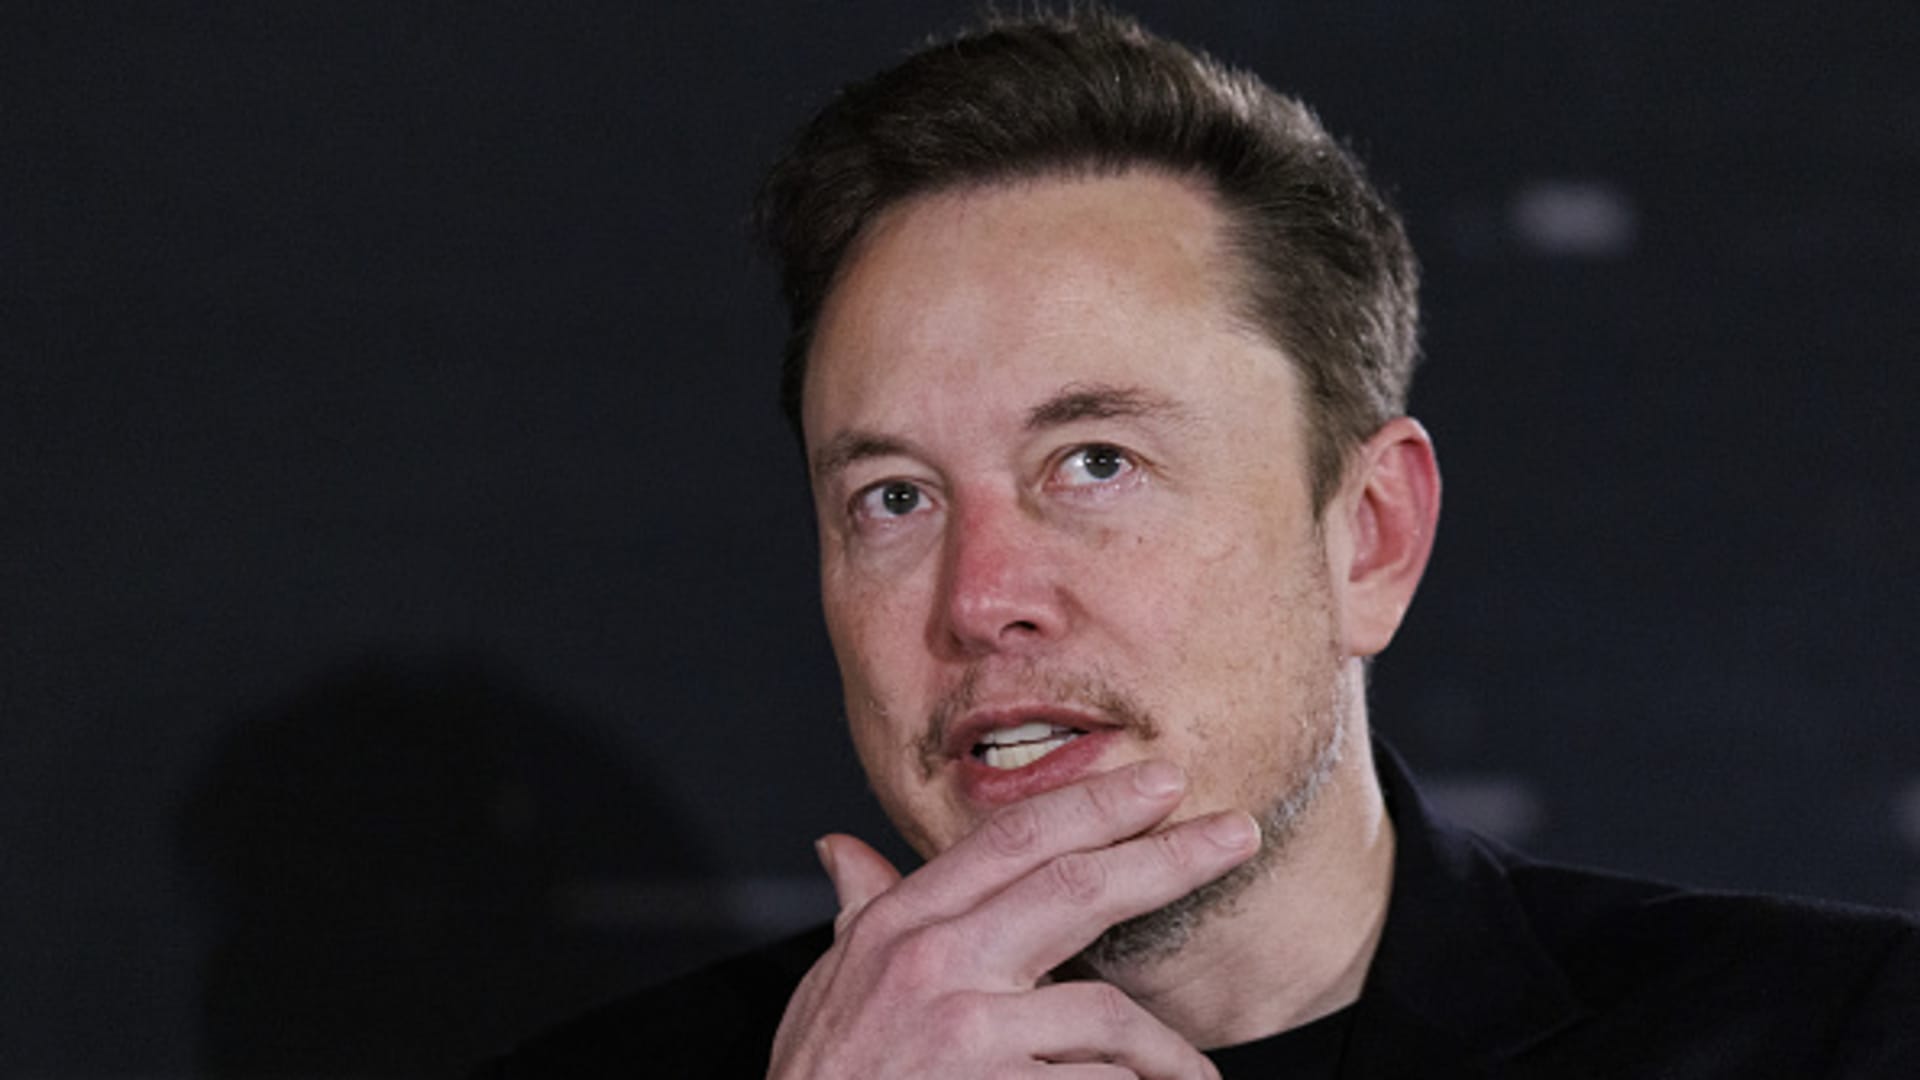 White House blasts Elon Musk for promoting ‘Antisemitic and racist hate’